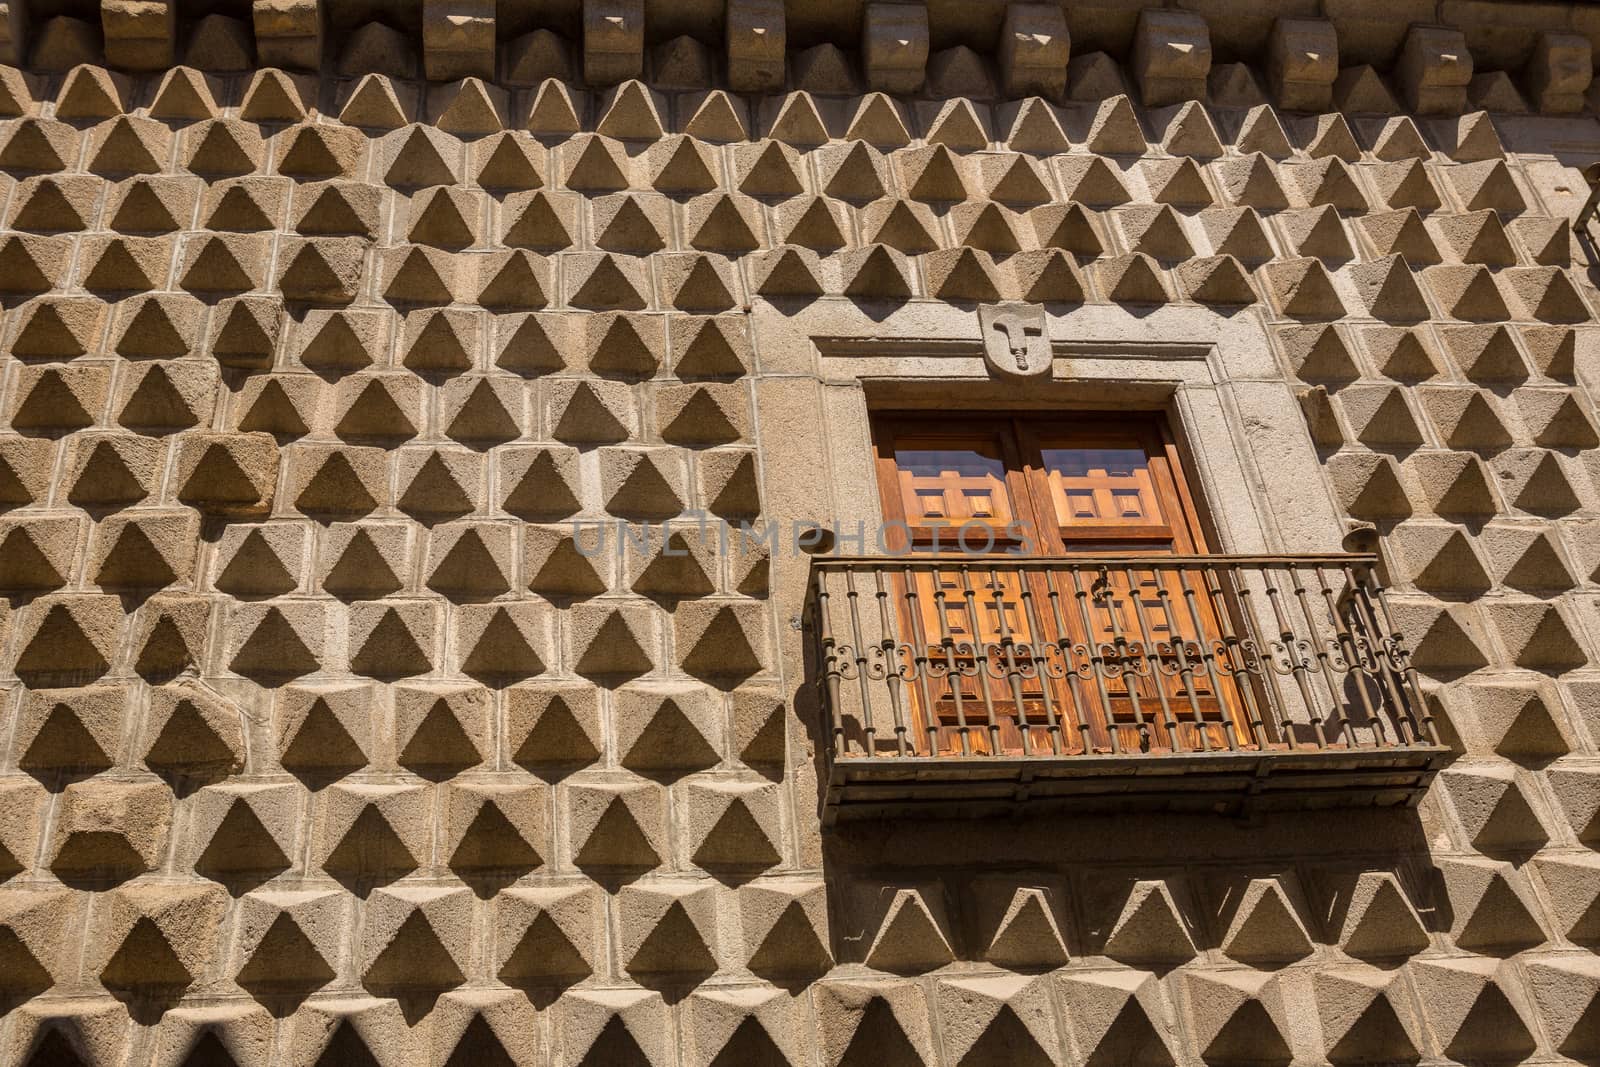 Segovia, Spain - House Los Picos is most notable for its facade which is covered entirely by pyramid-shaped granite blocks. The building dates back to the 15th century.